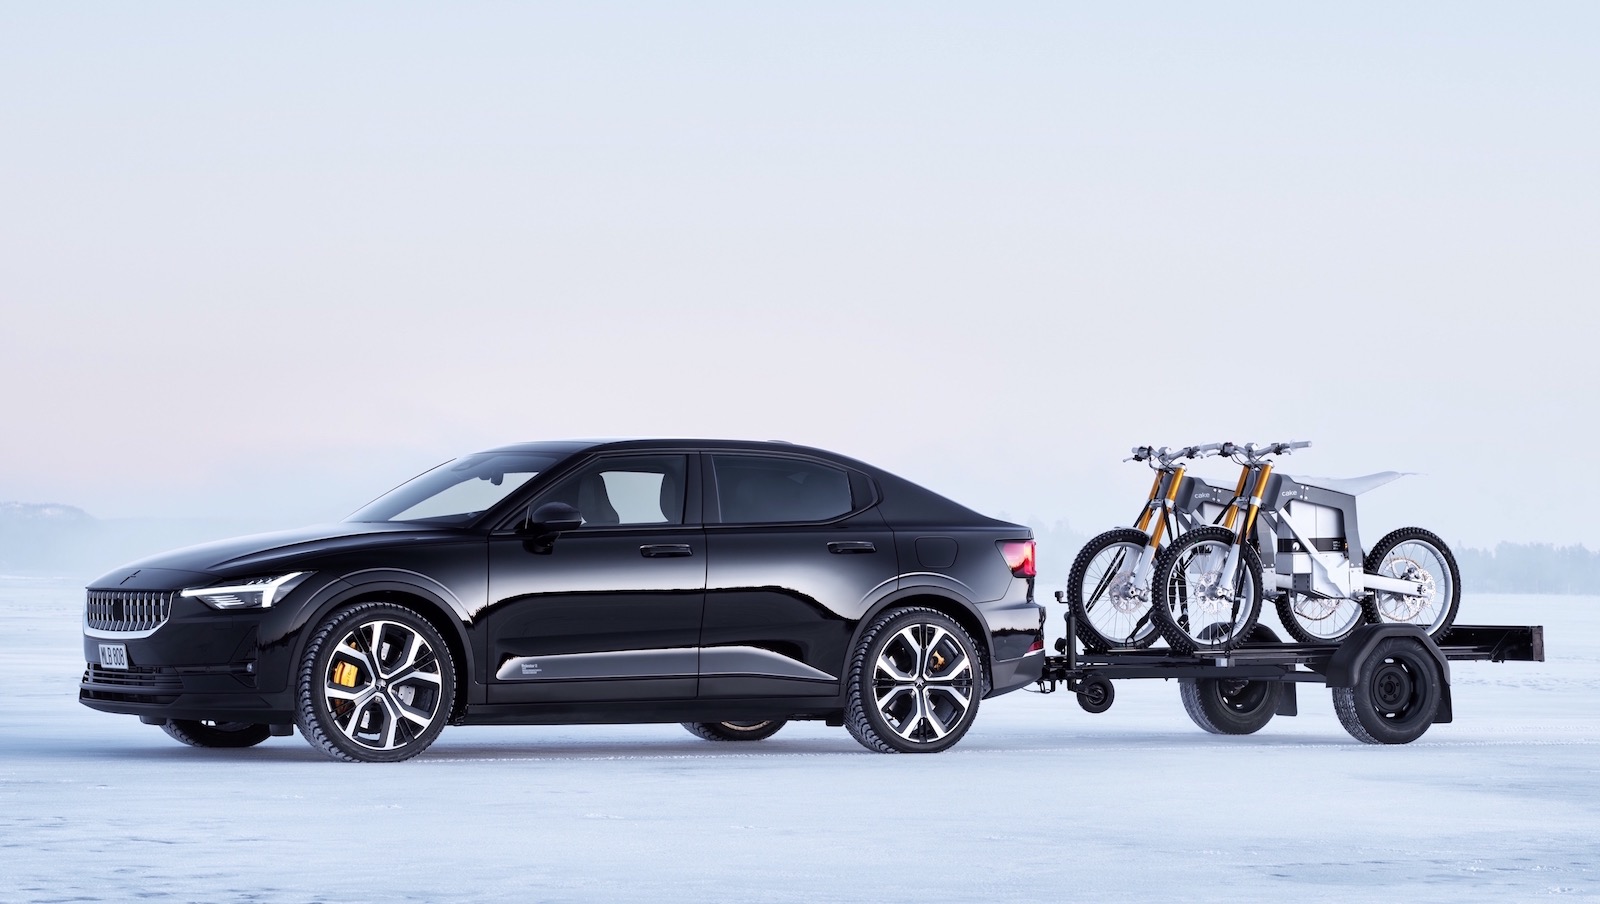 Polestar 2 offers class-leading 1500kg towing capacity